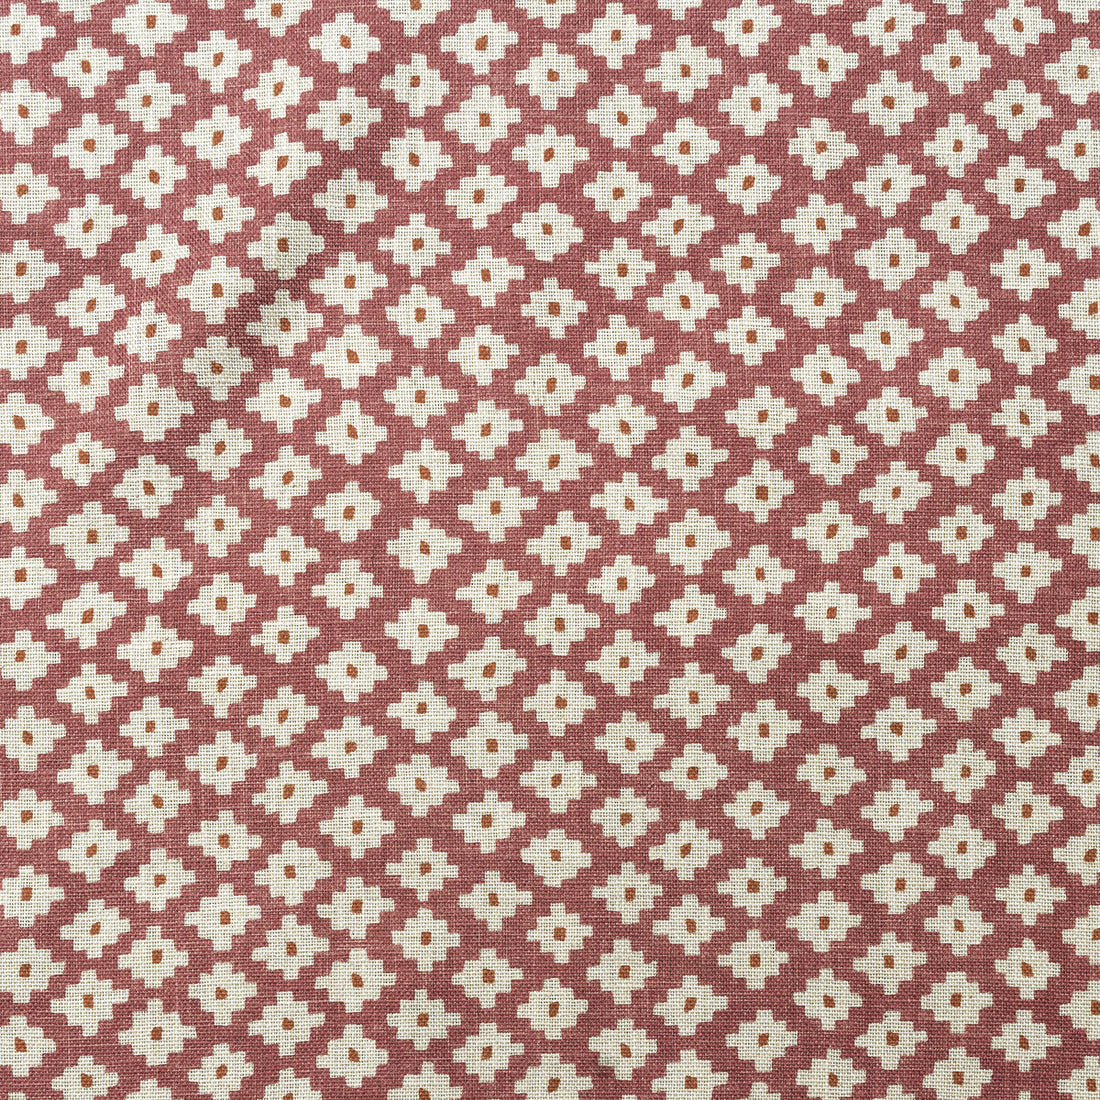 Maze fabric in pink color - pattern AM100381.77.0 - by Kravet Couture in the Andrew Martin Garden Path collection